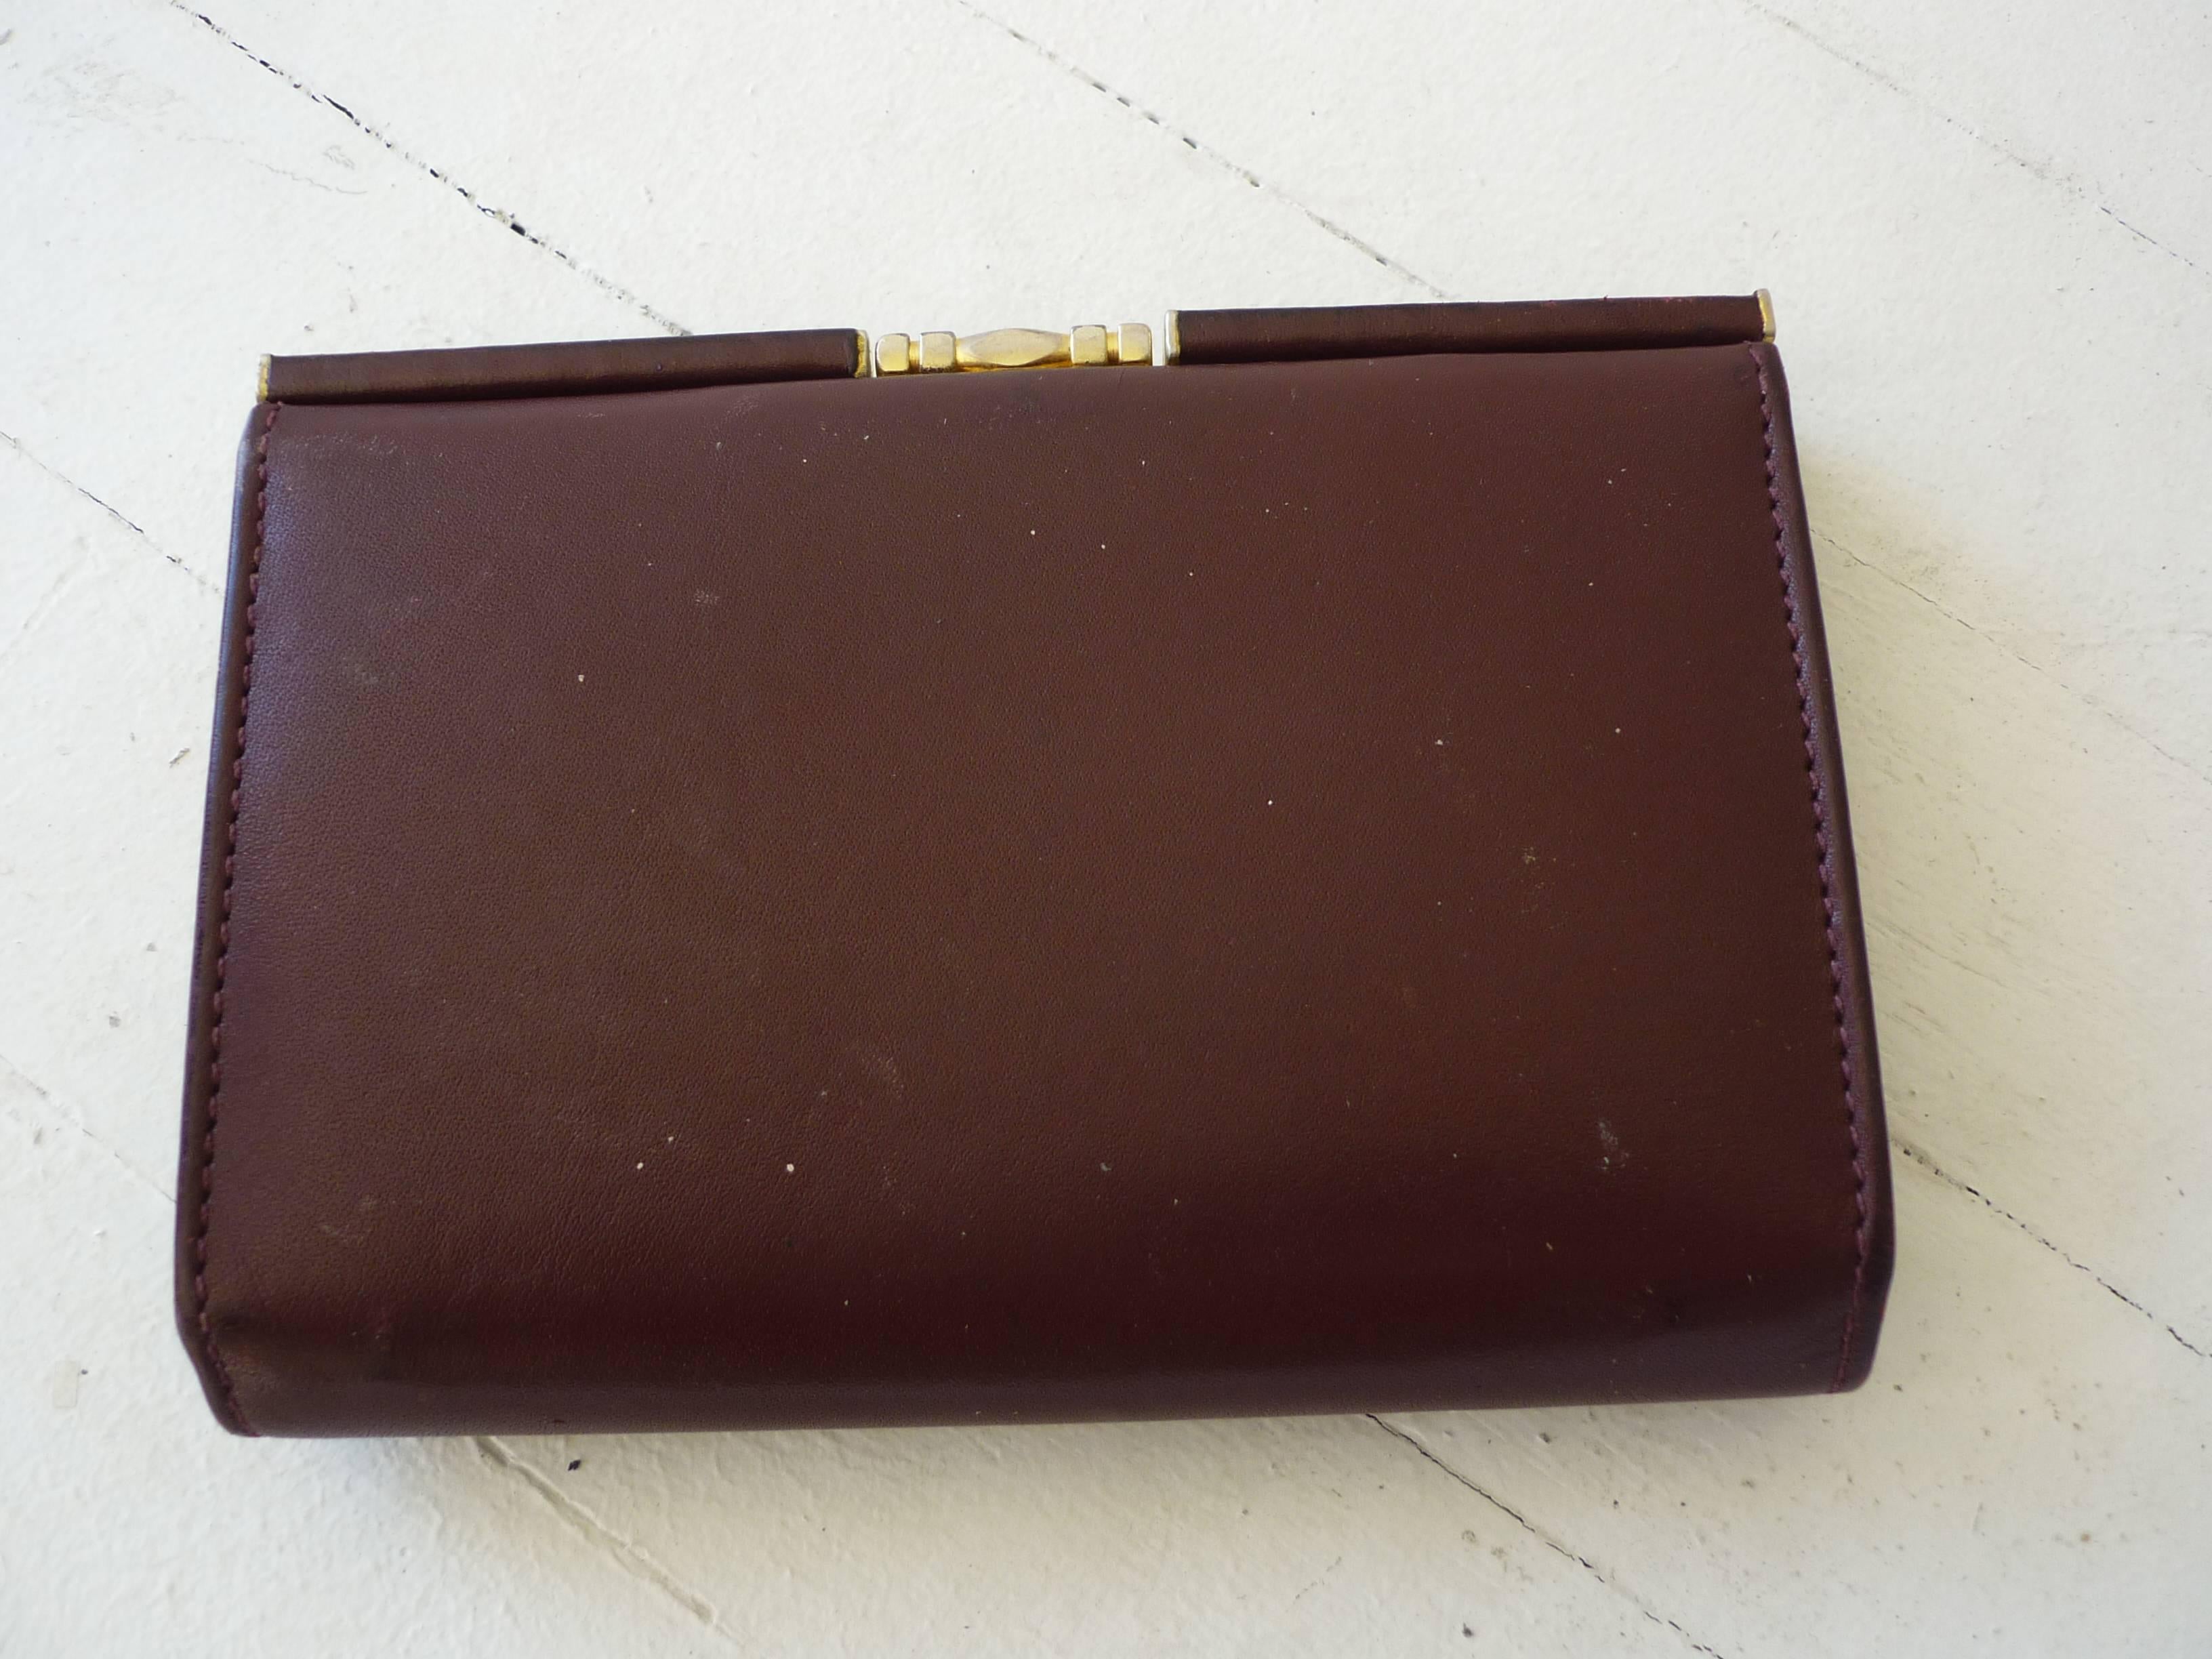 A wallet and a separate coin compartment in bordeaux leather with gold tone accent and kiss-lock closure.

Apart from the full size change compartment, the wallet features two separate billfolds and a clear plastic slot on the side. 

There is